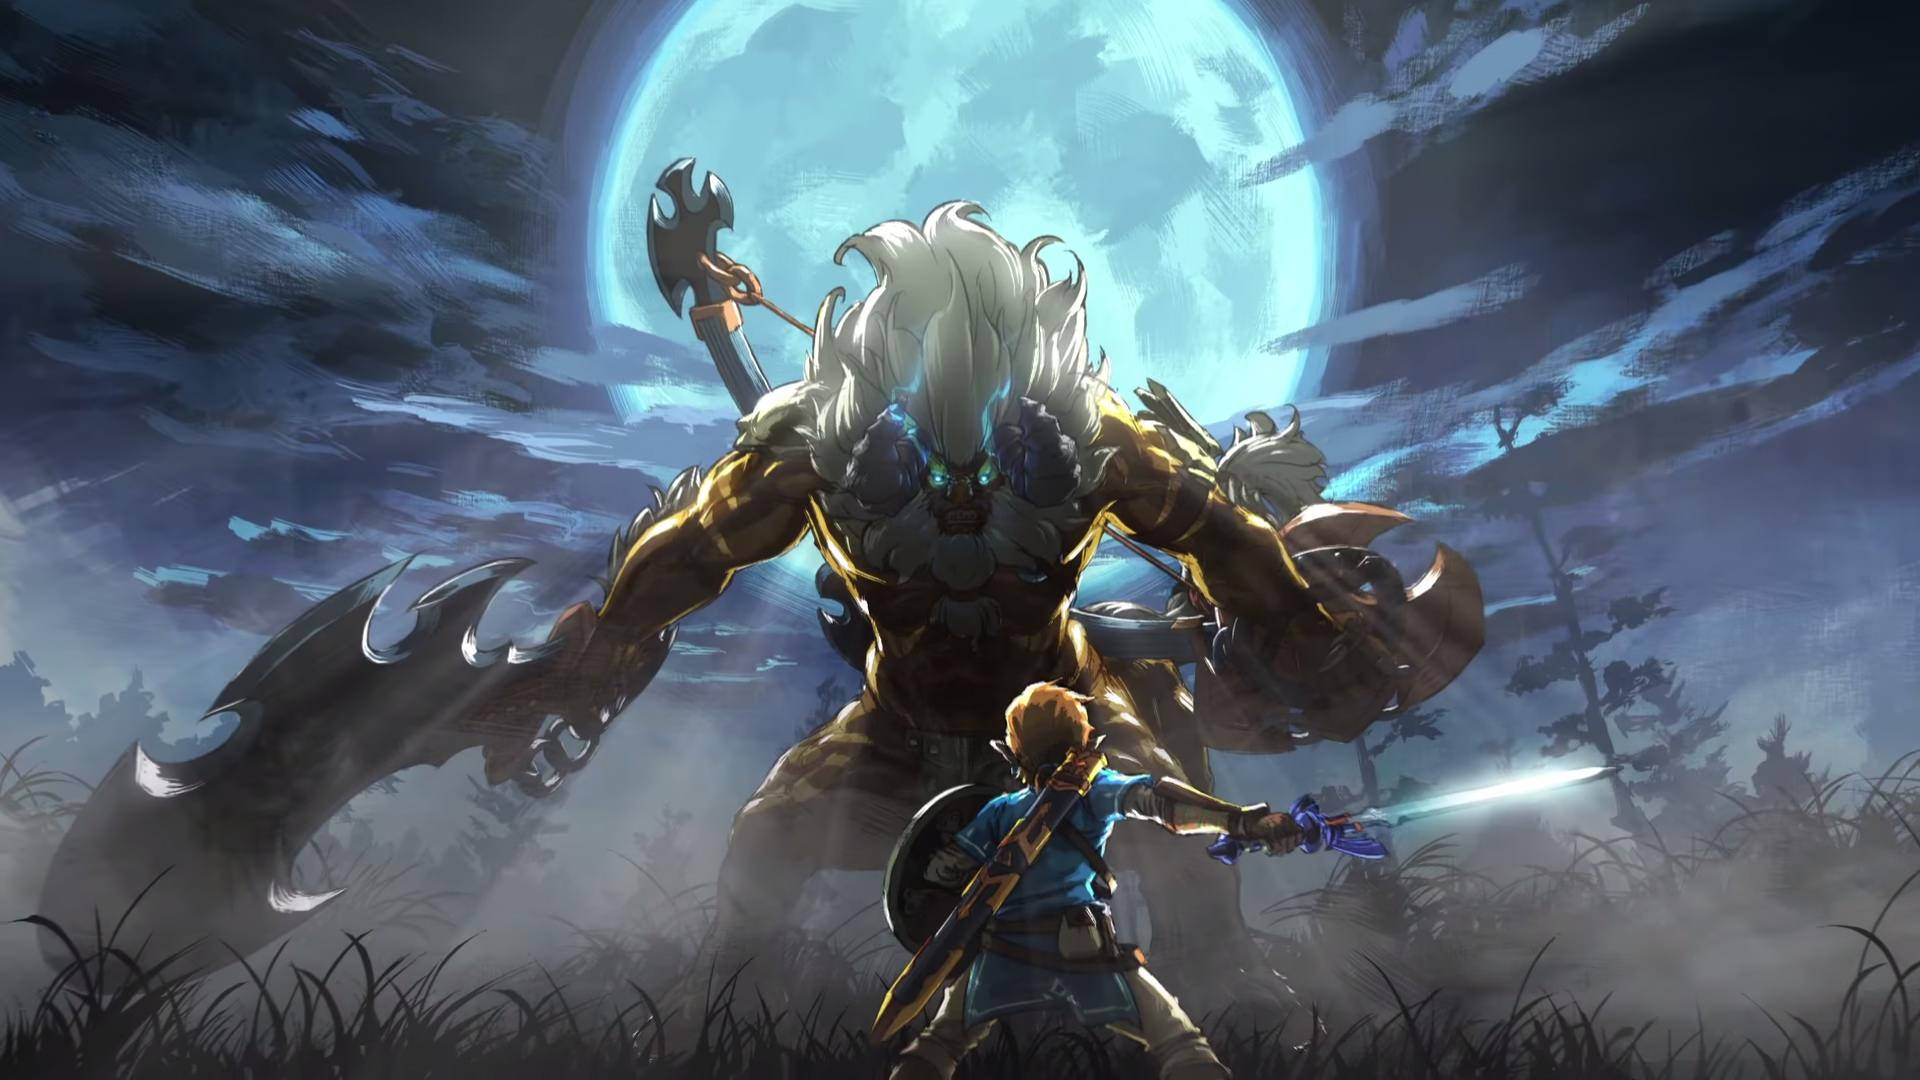 Cool Hd Breath Of The Wild Epic Battle Background